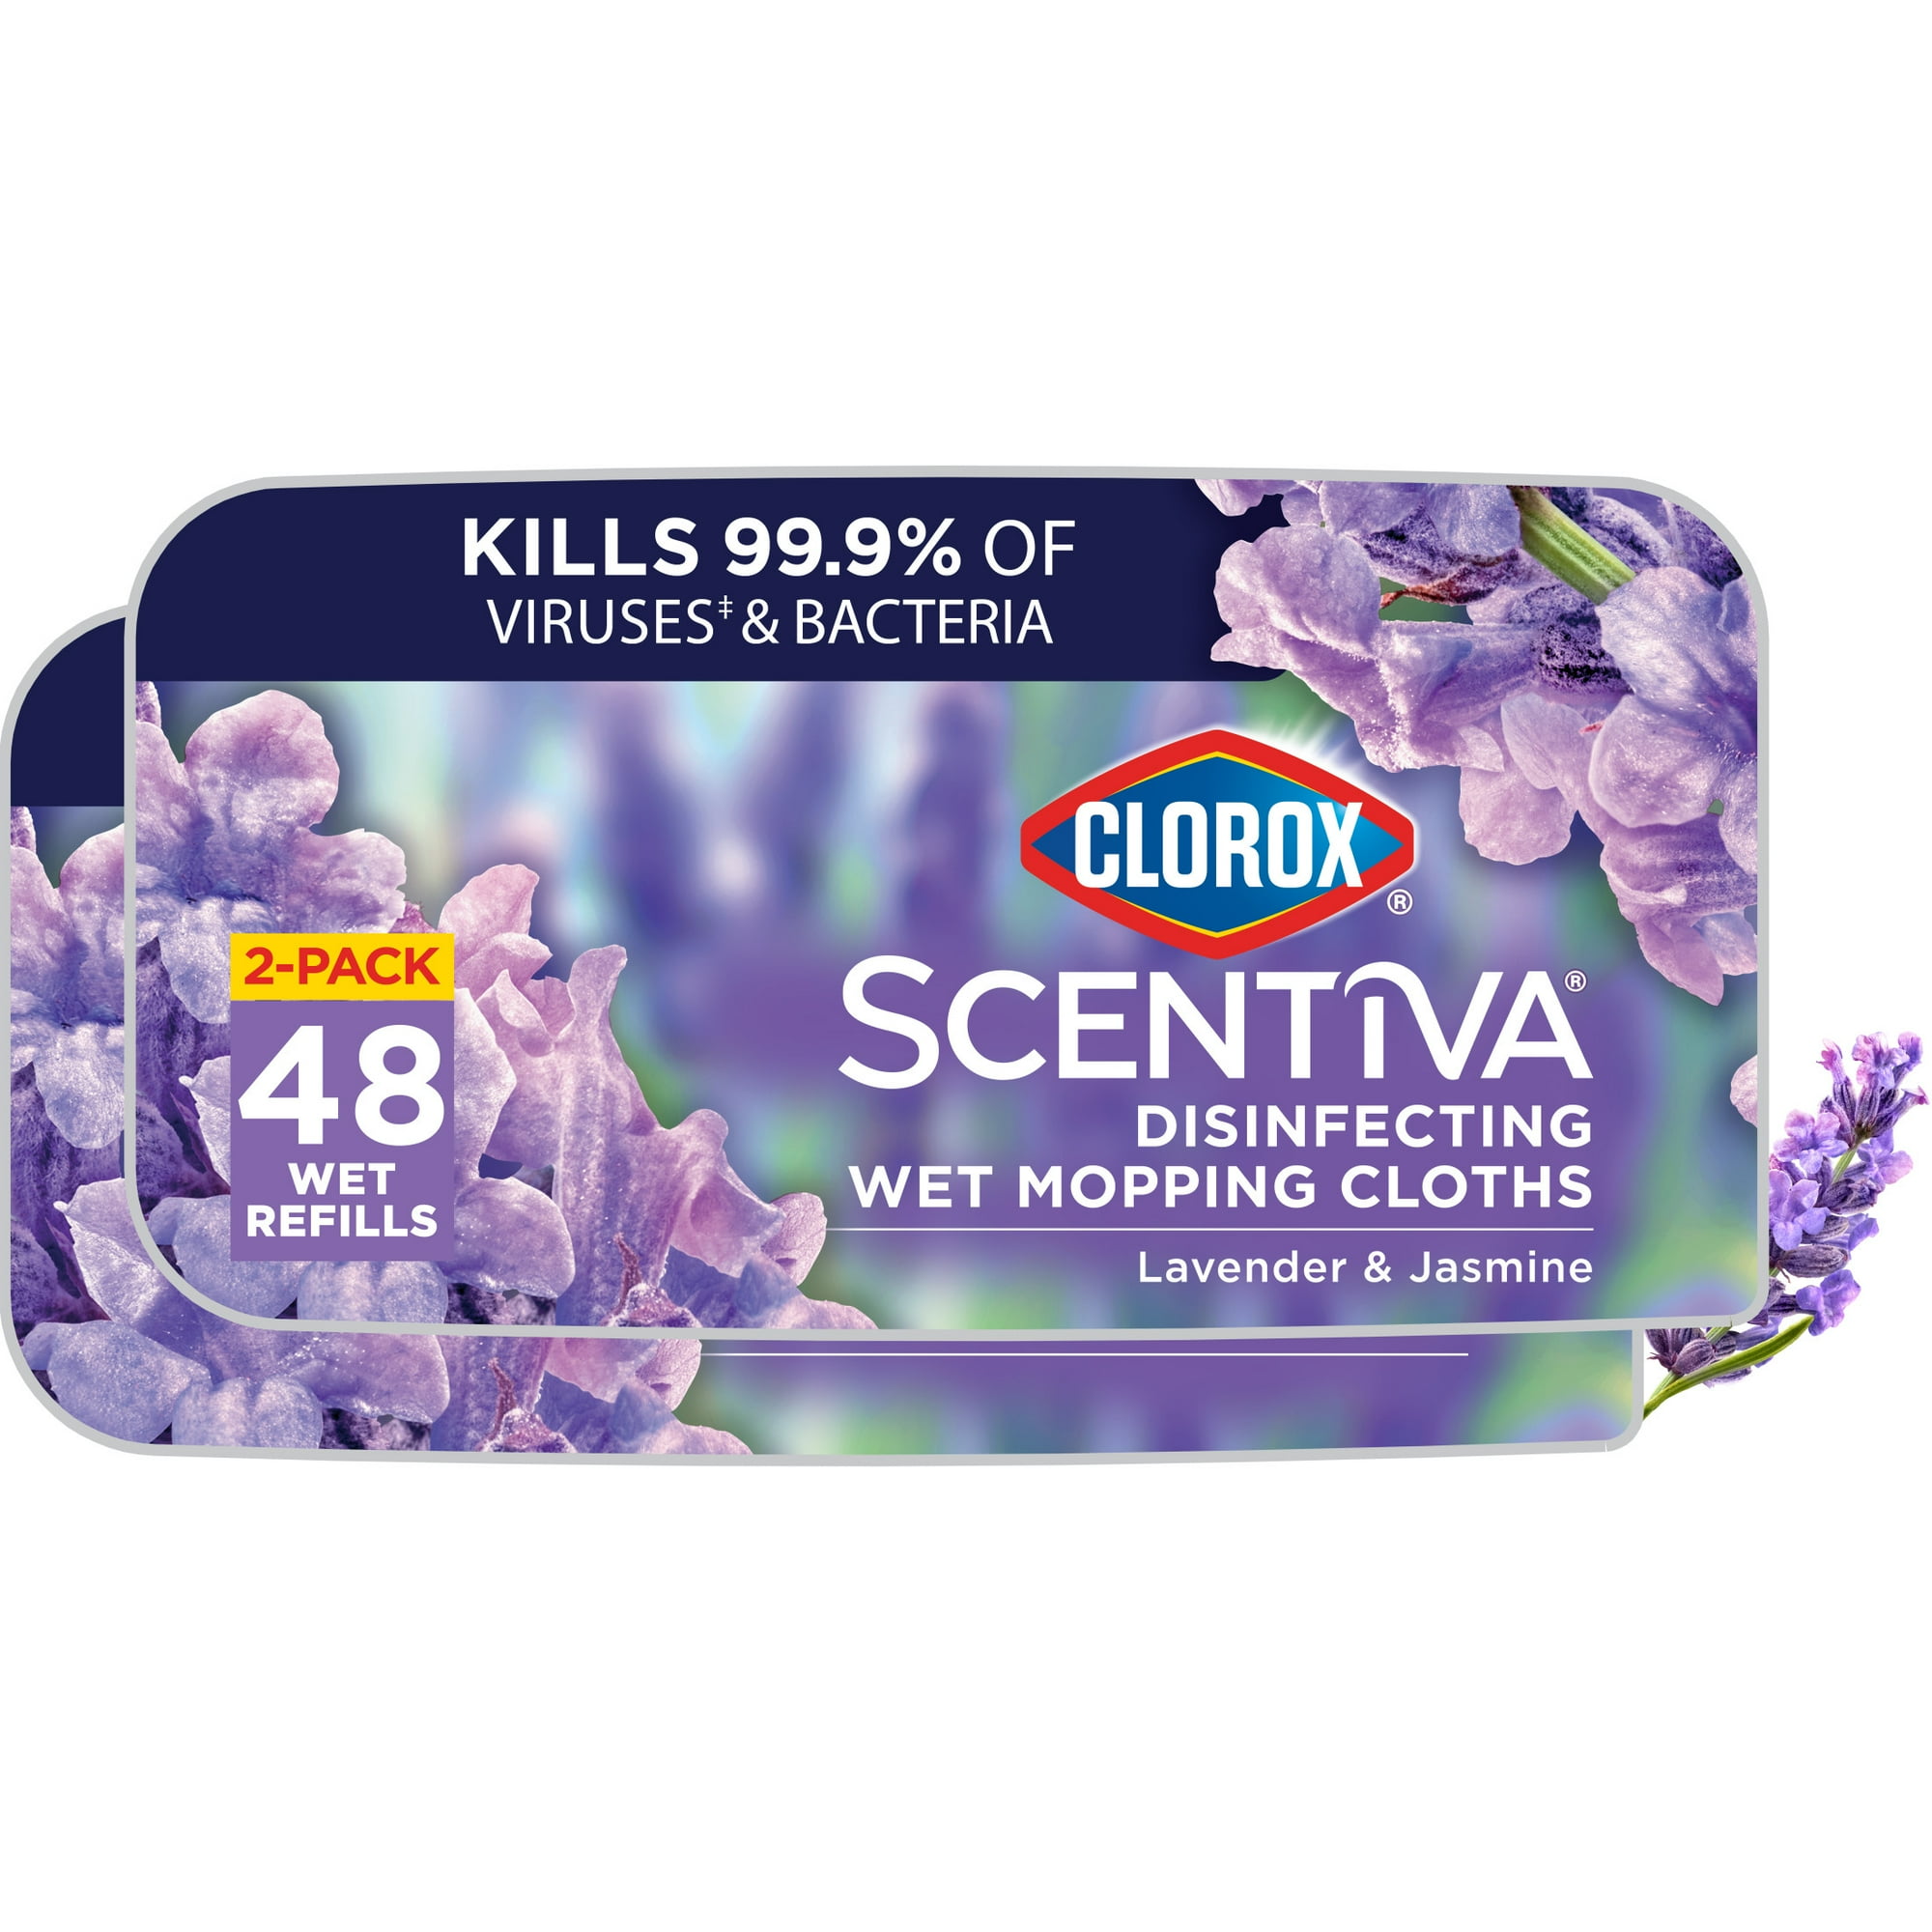 48-Count Clorox Scentiva Disinfecting Wet Mop Pads (Lavender & Jasmine) $8.20 + Free Shipping w/ Walmart+ or $35+